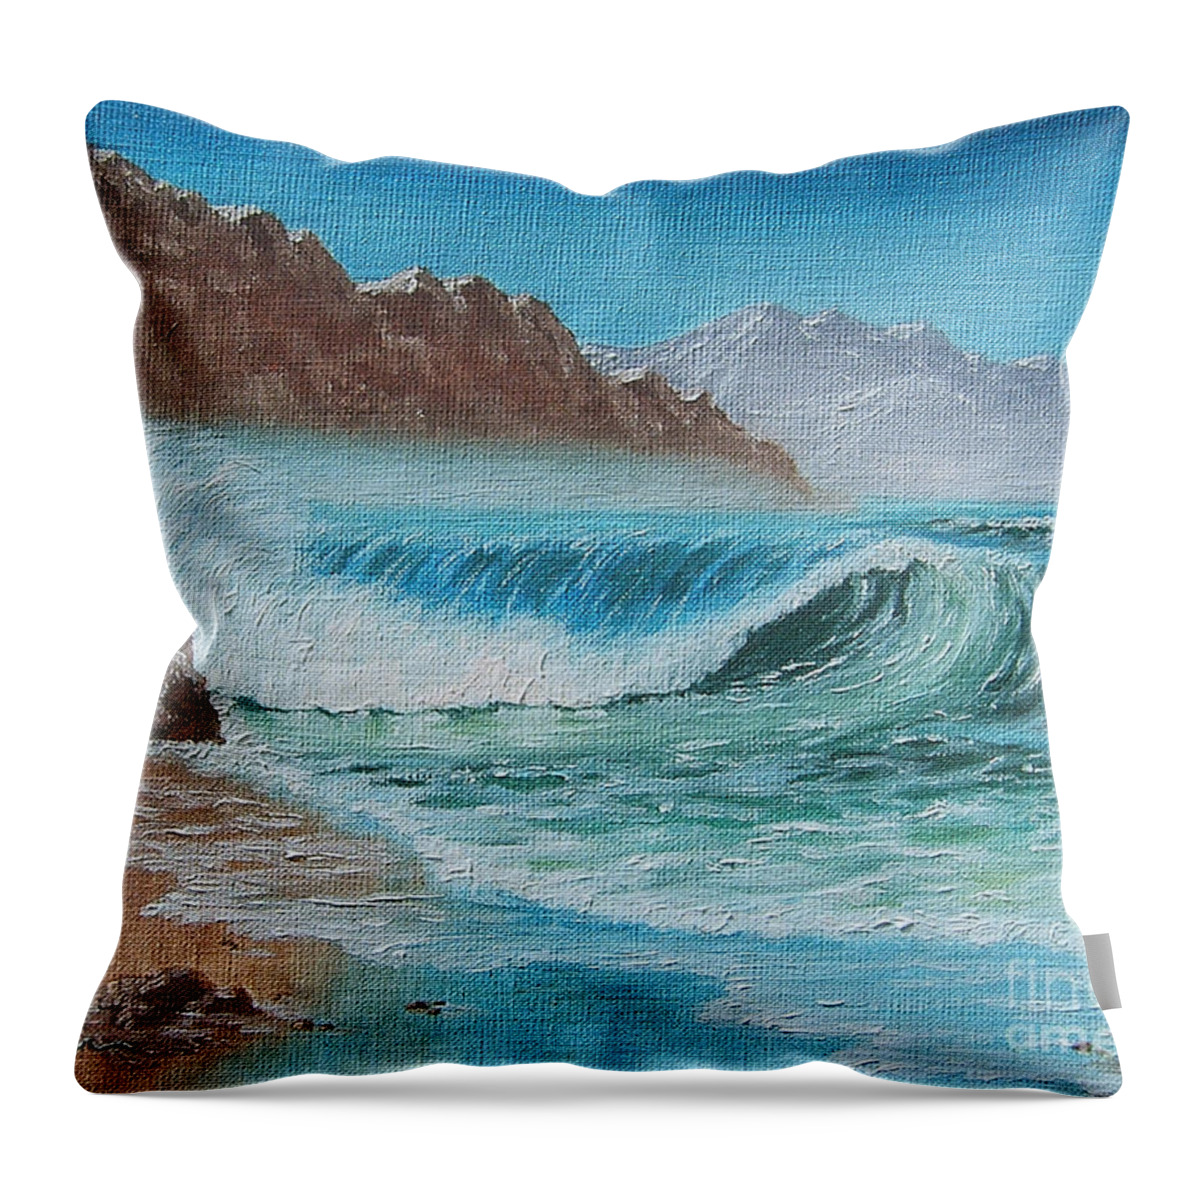 Mist Throw Pillow featuring the painting Ocean Mist by Val Miller